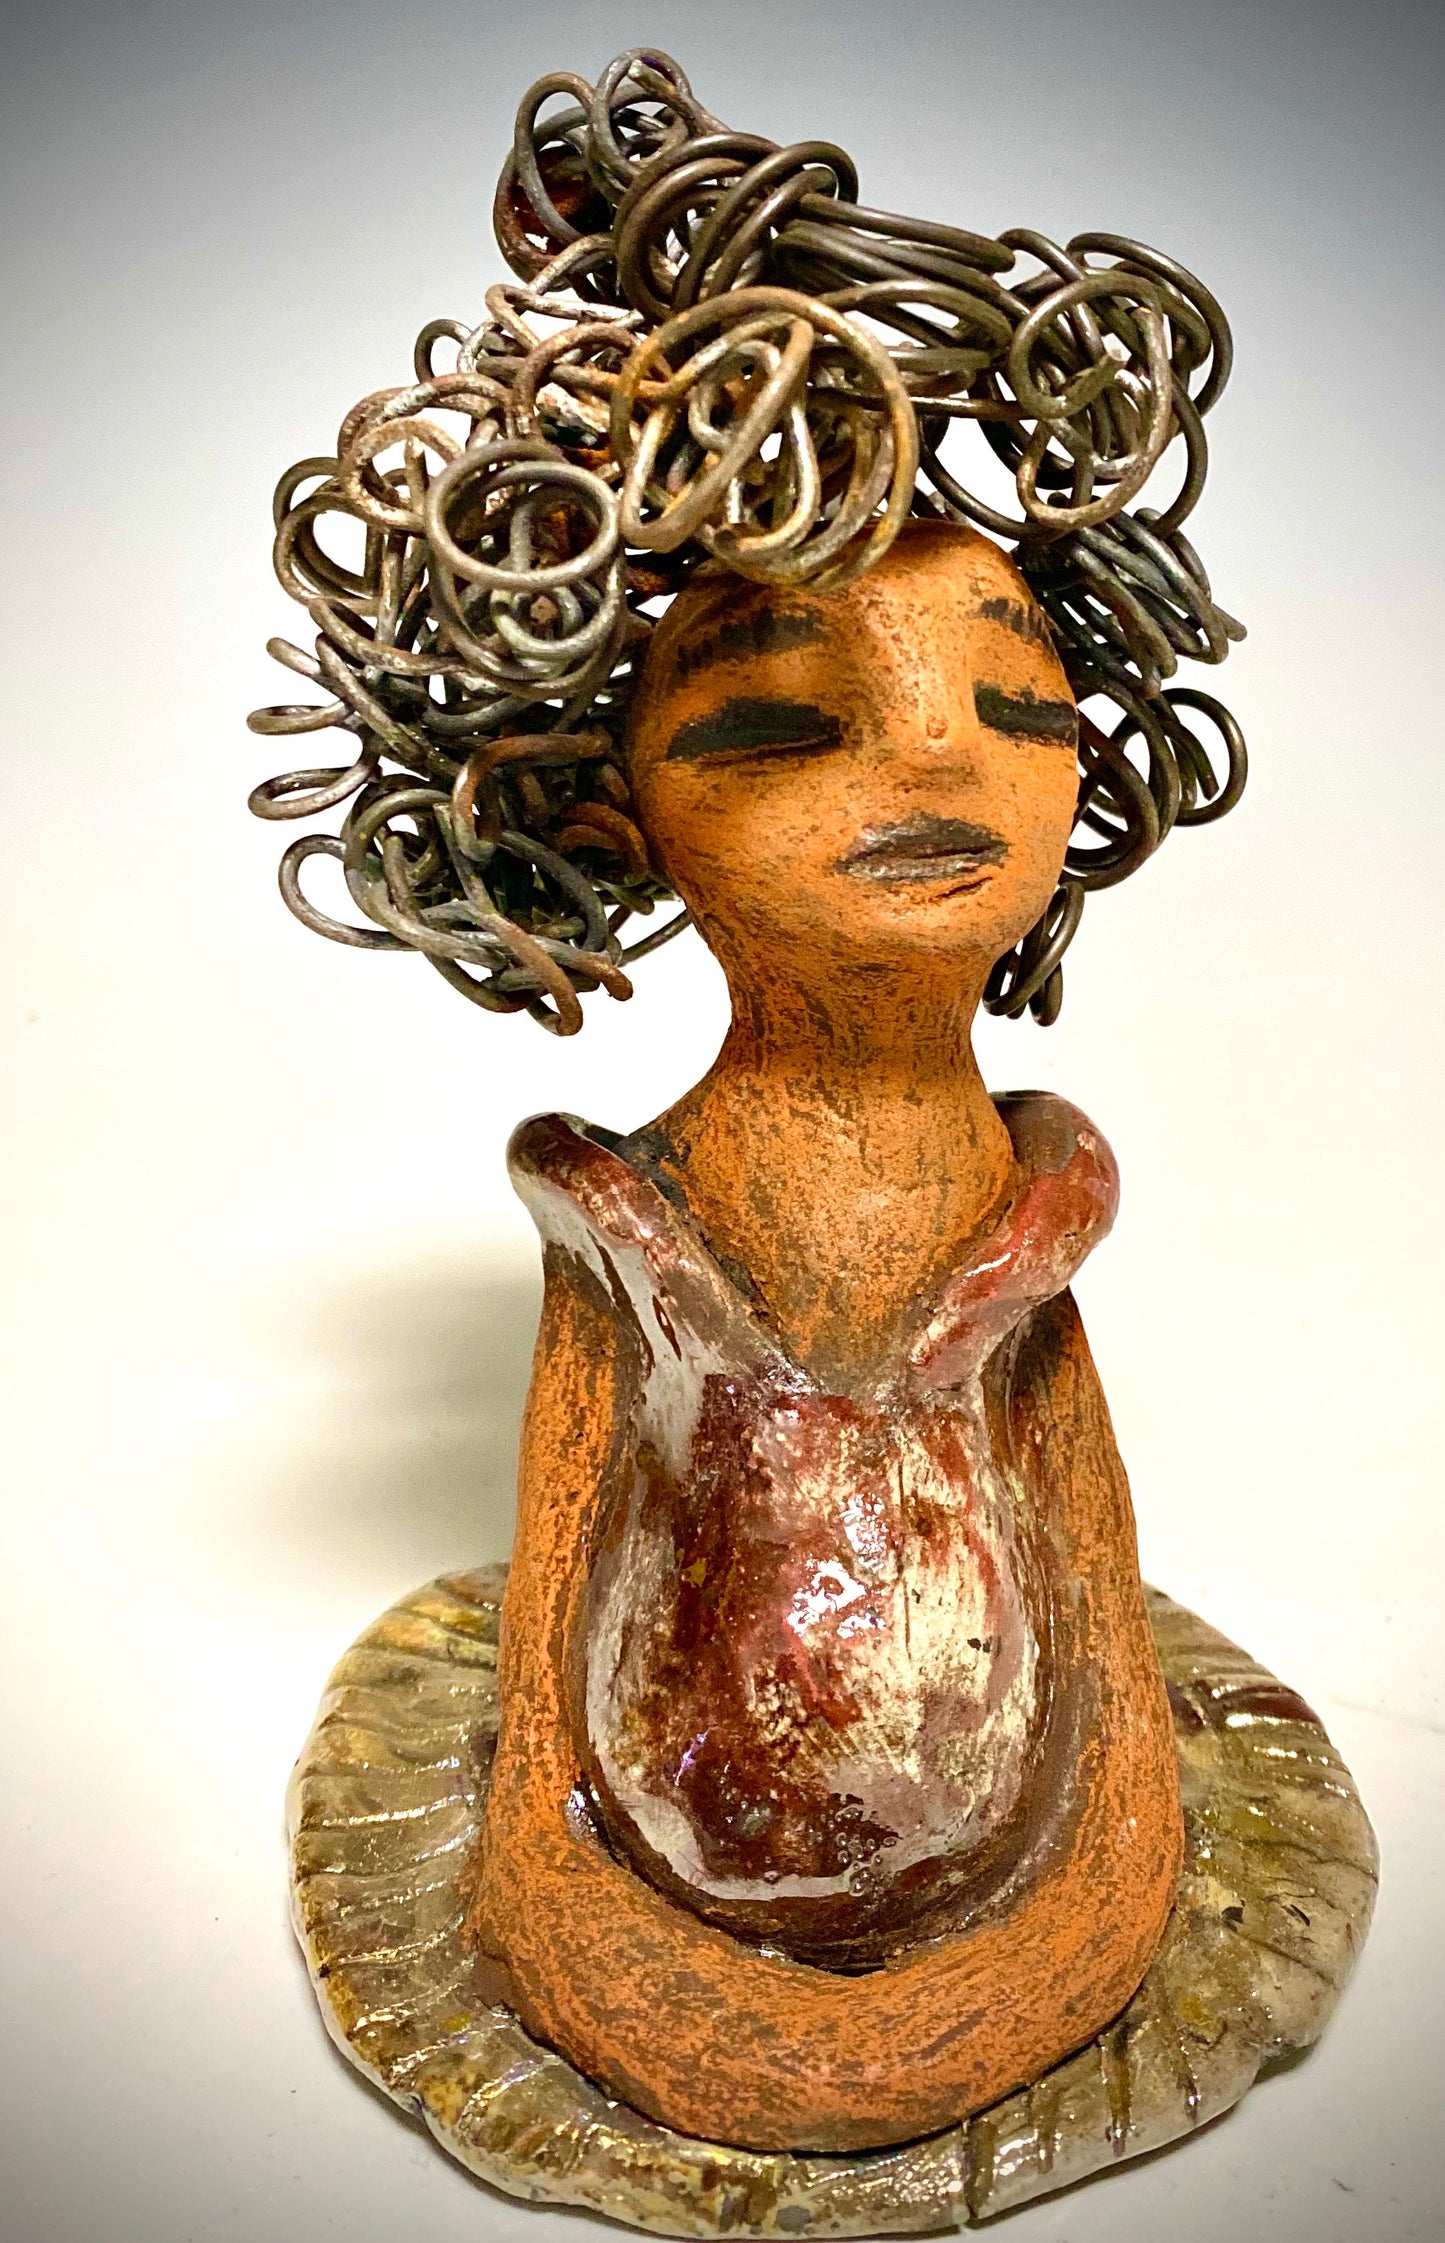 Meet Carleen! Carleen  stands 6" x 4" x 4" and weighs 12 ozs. Carleen has a honey brown complexion with 16 gauge curled wire hair. She wears an copper metallic dress. Carleen  has her long loving arms at her side as she rest and waits.